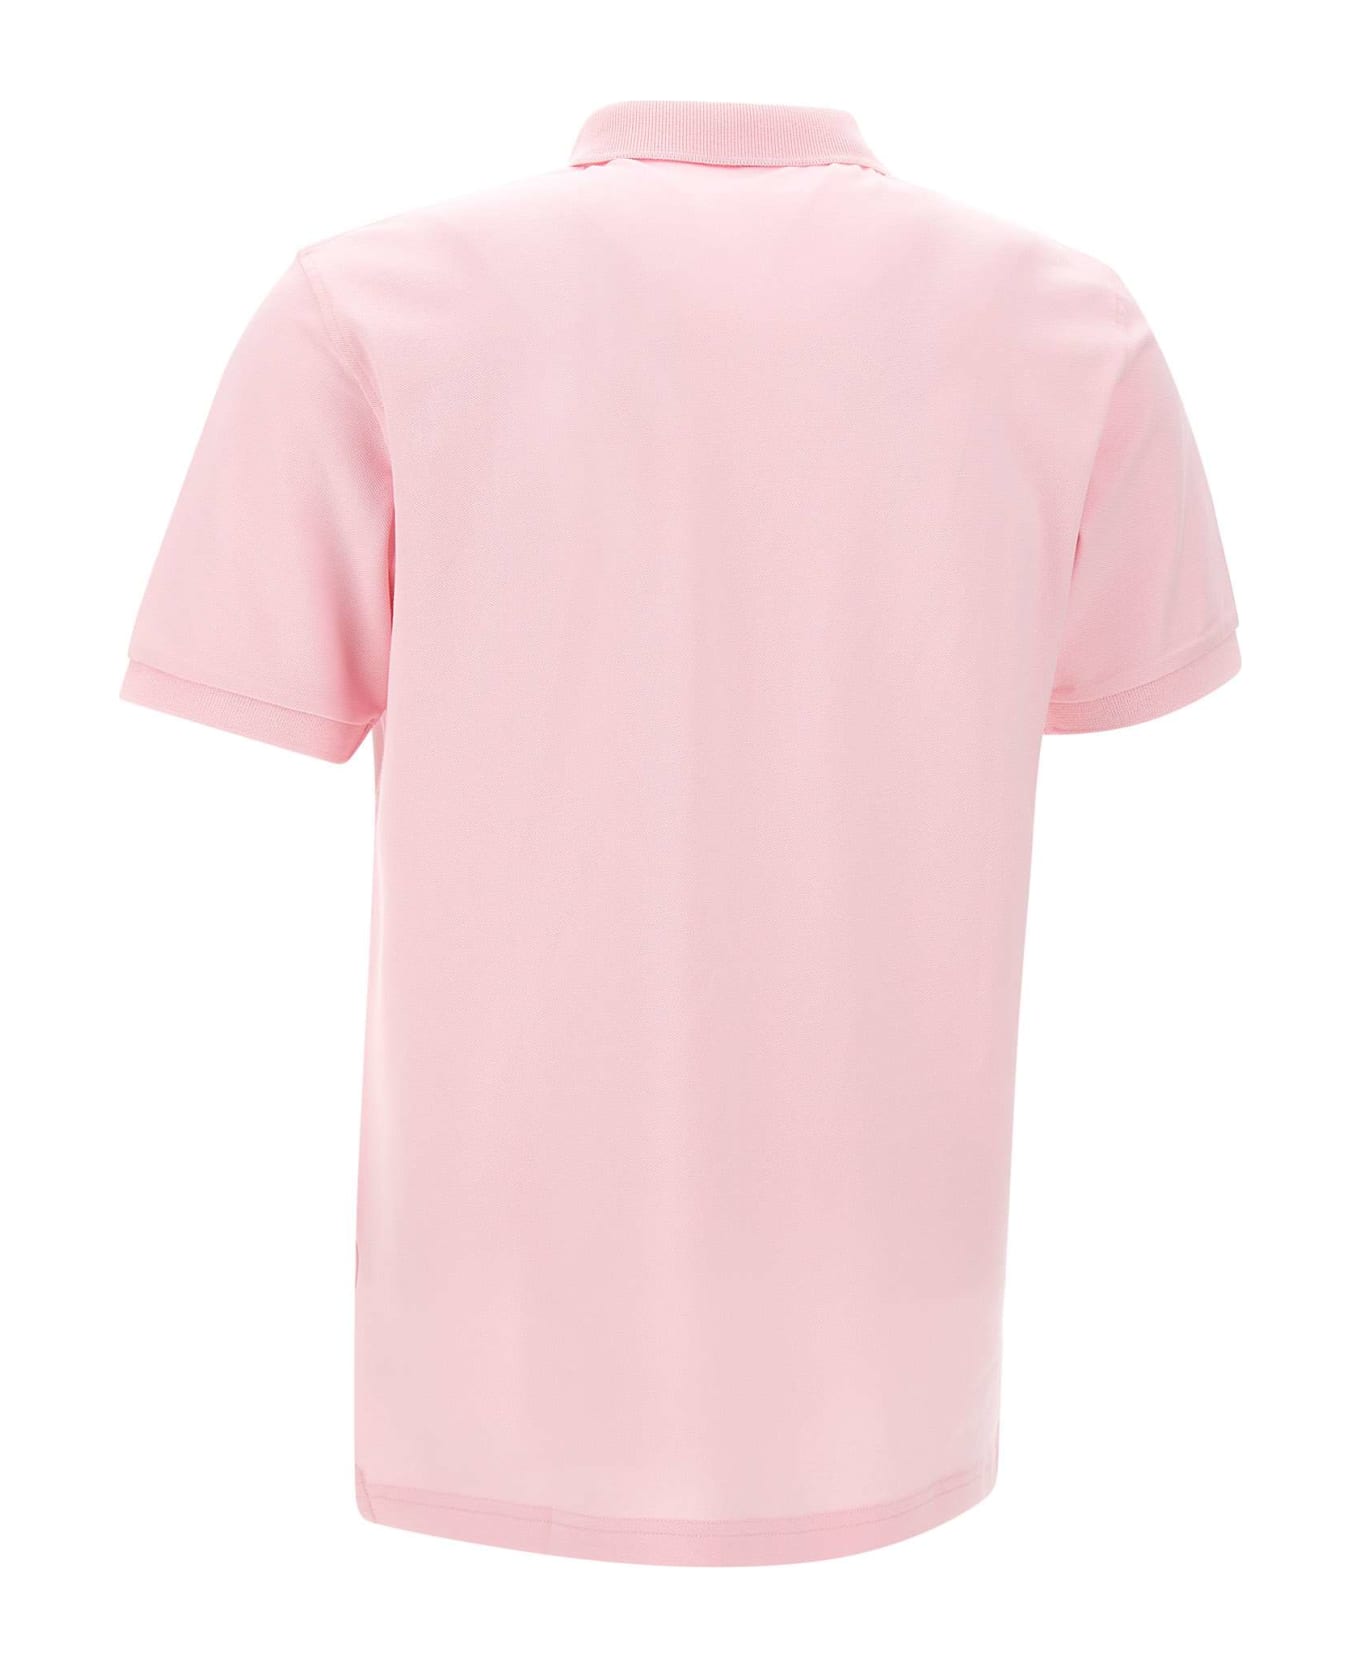 Sun 68 "solid" Pique Cotton Polo Shirt - PINK ポロシャツ